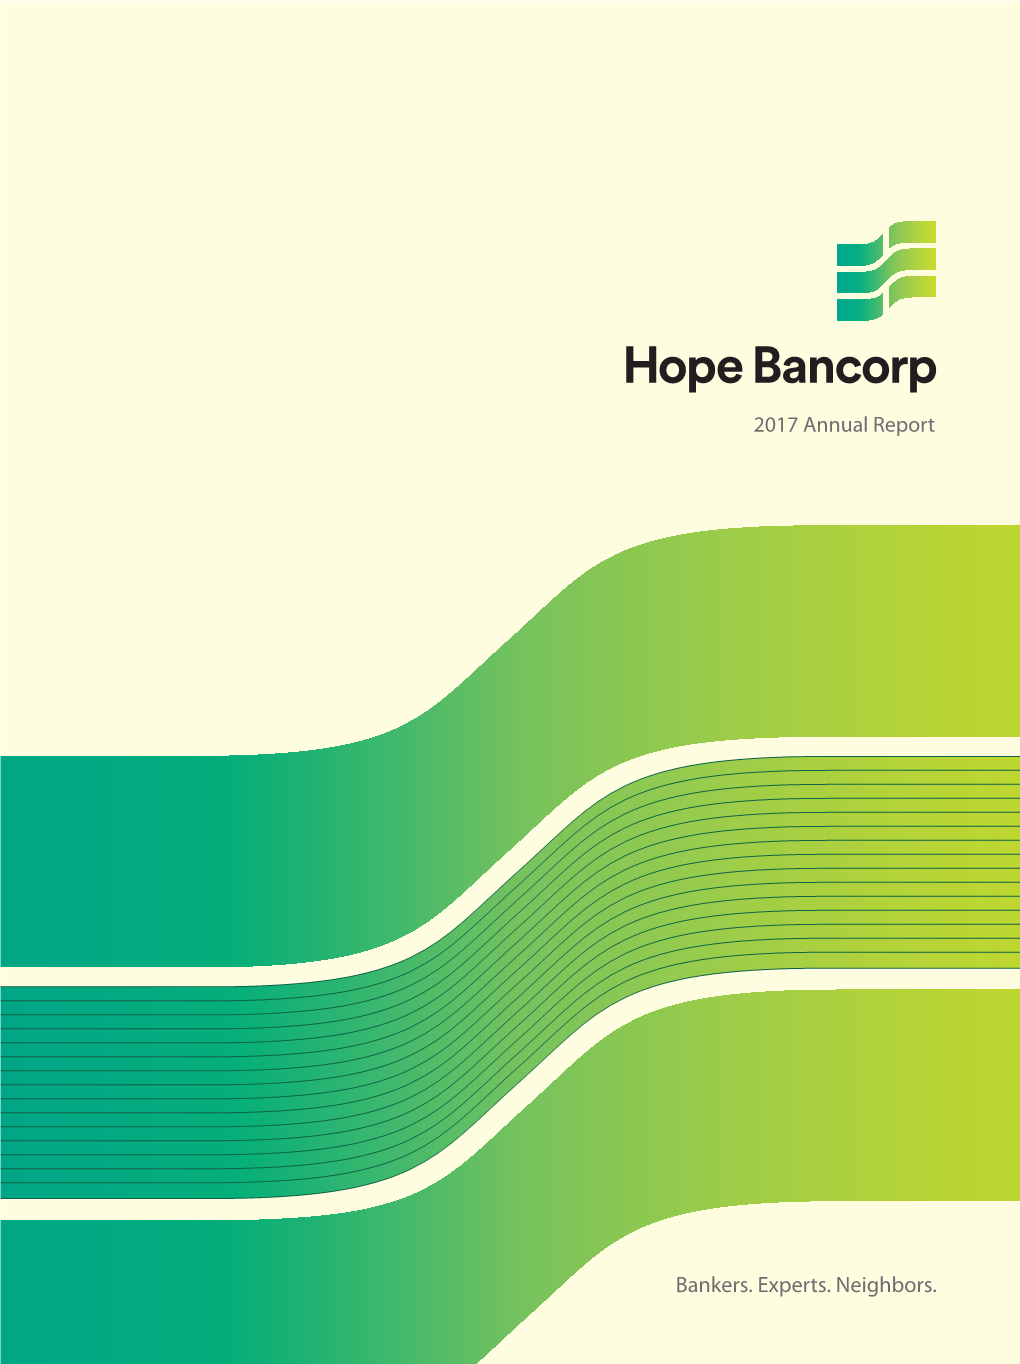 Bank of Hope, One of the Leading Asian-American Banks in the United States